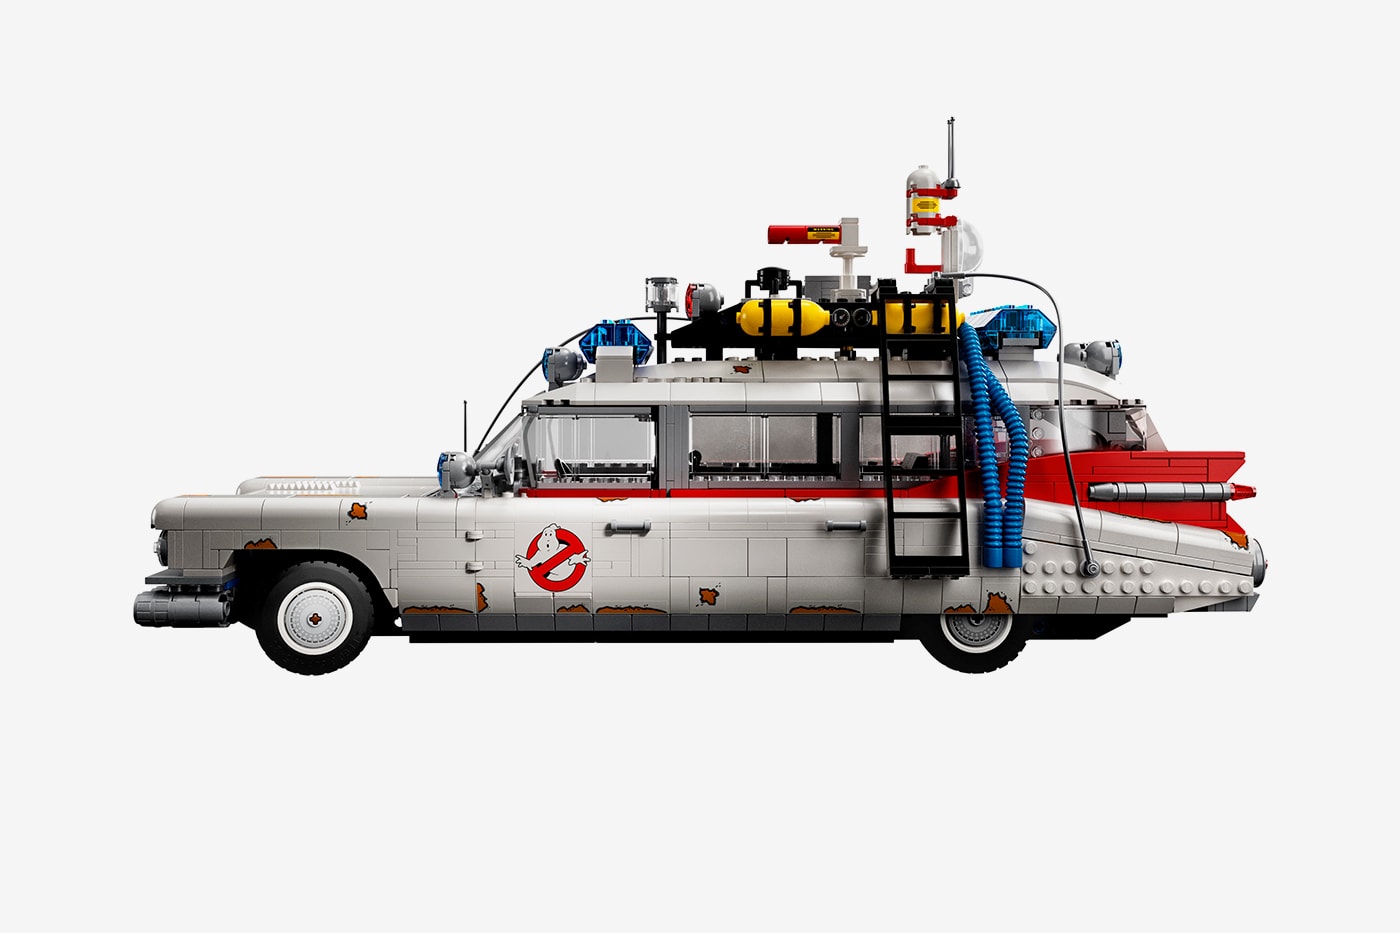 LEGO 2352 Piece Ghostbusters ECTO1 ectomobile movie franchise 1959 Cadillac Miller Meteor ambulance 6 14 curved windshield five module steering wheel toys figures Kit Buy Price info